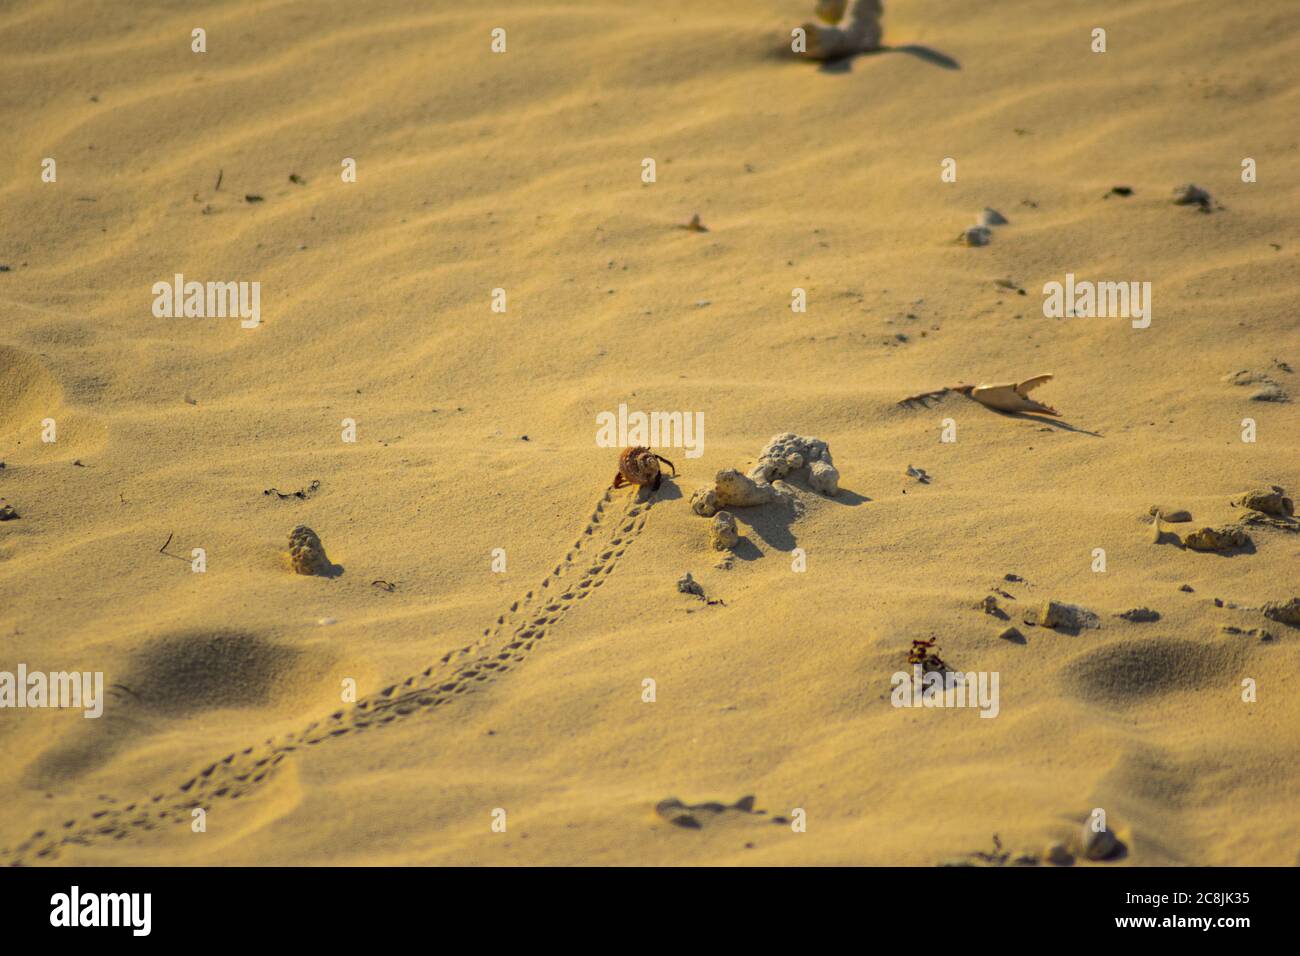 Hermit crab crossing a sun baked beach in Cuba Stock Photo